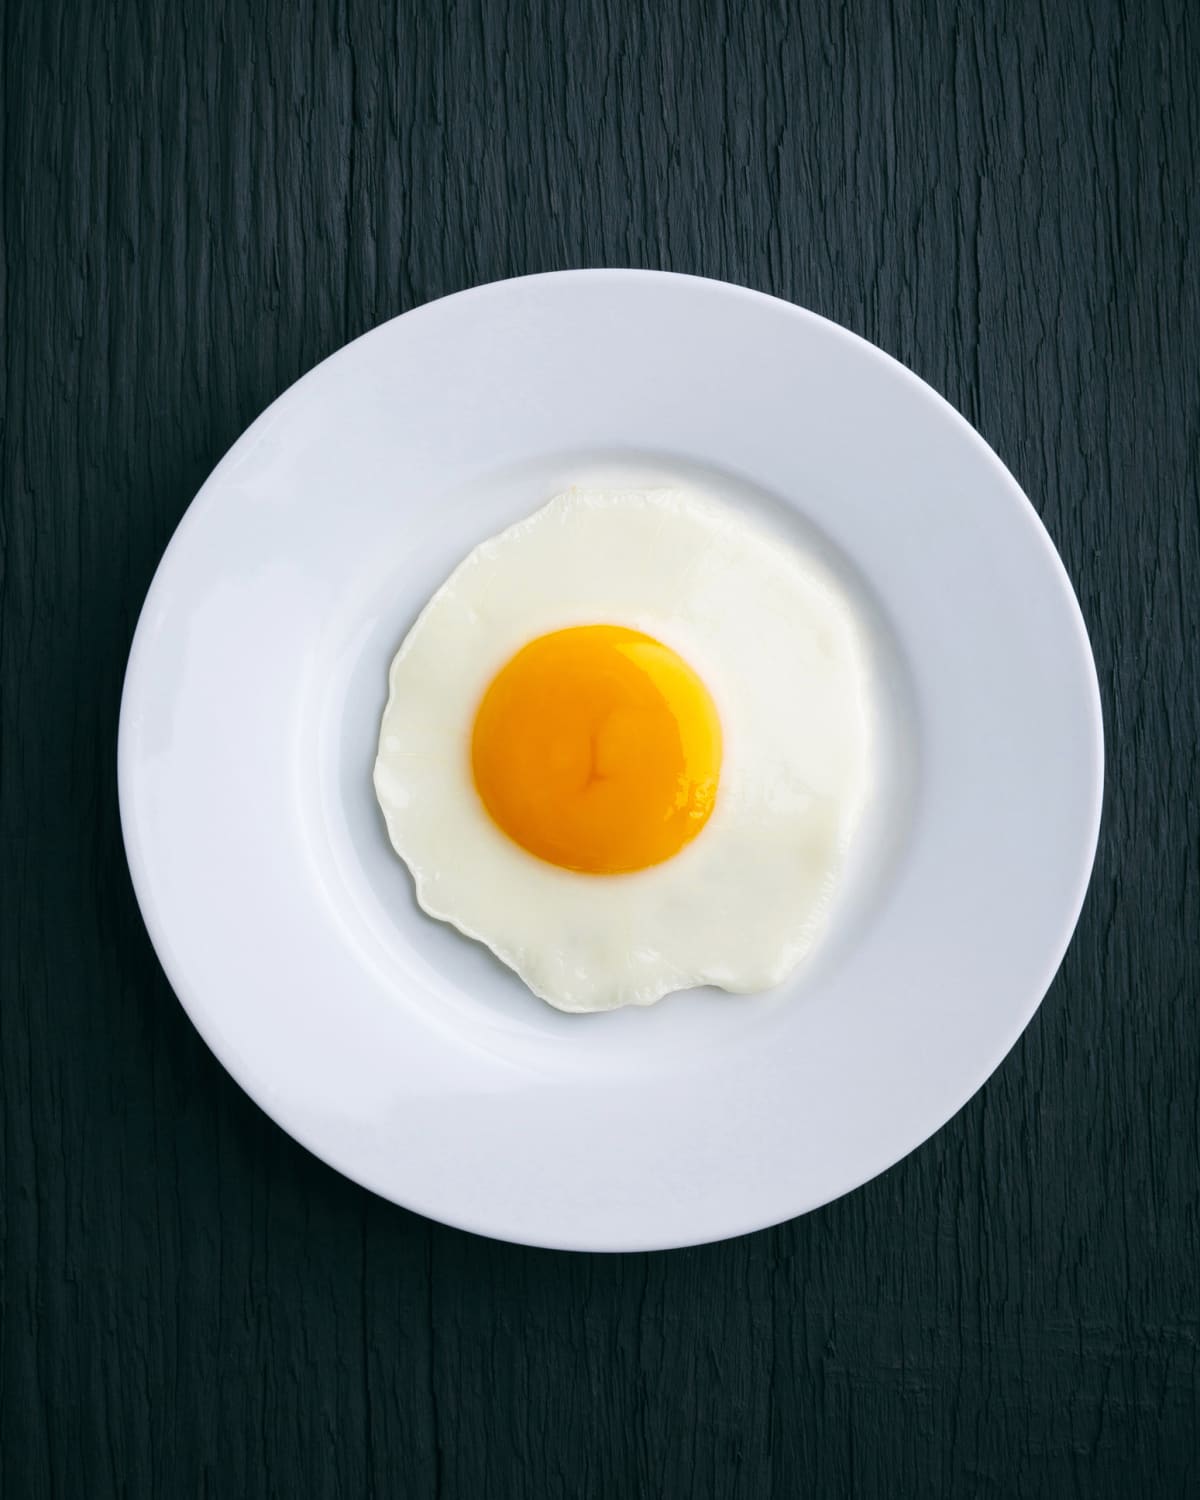 Moving a fried egg from frying pan